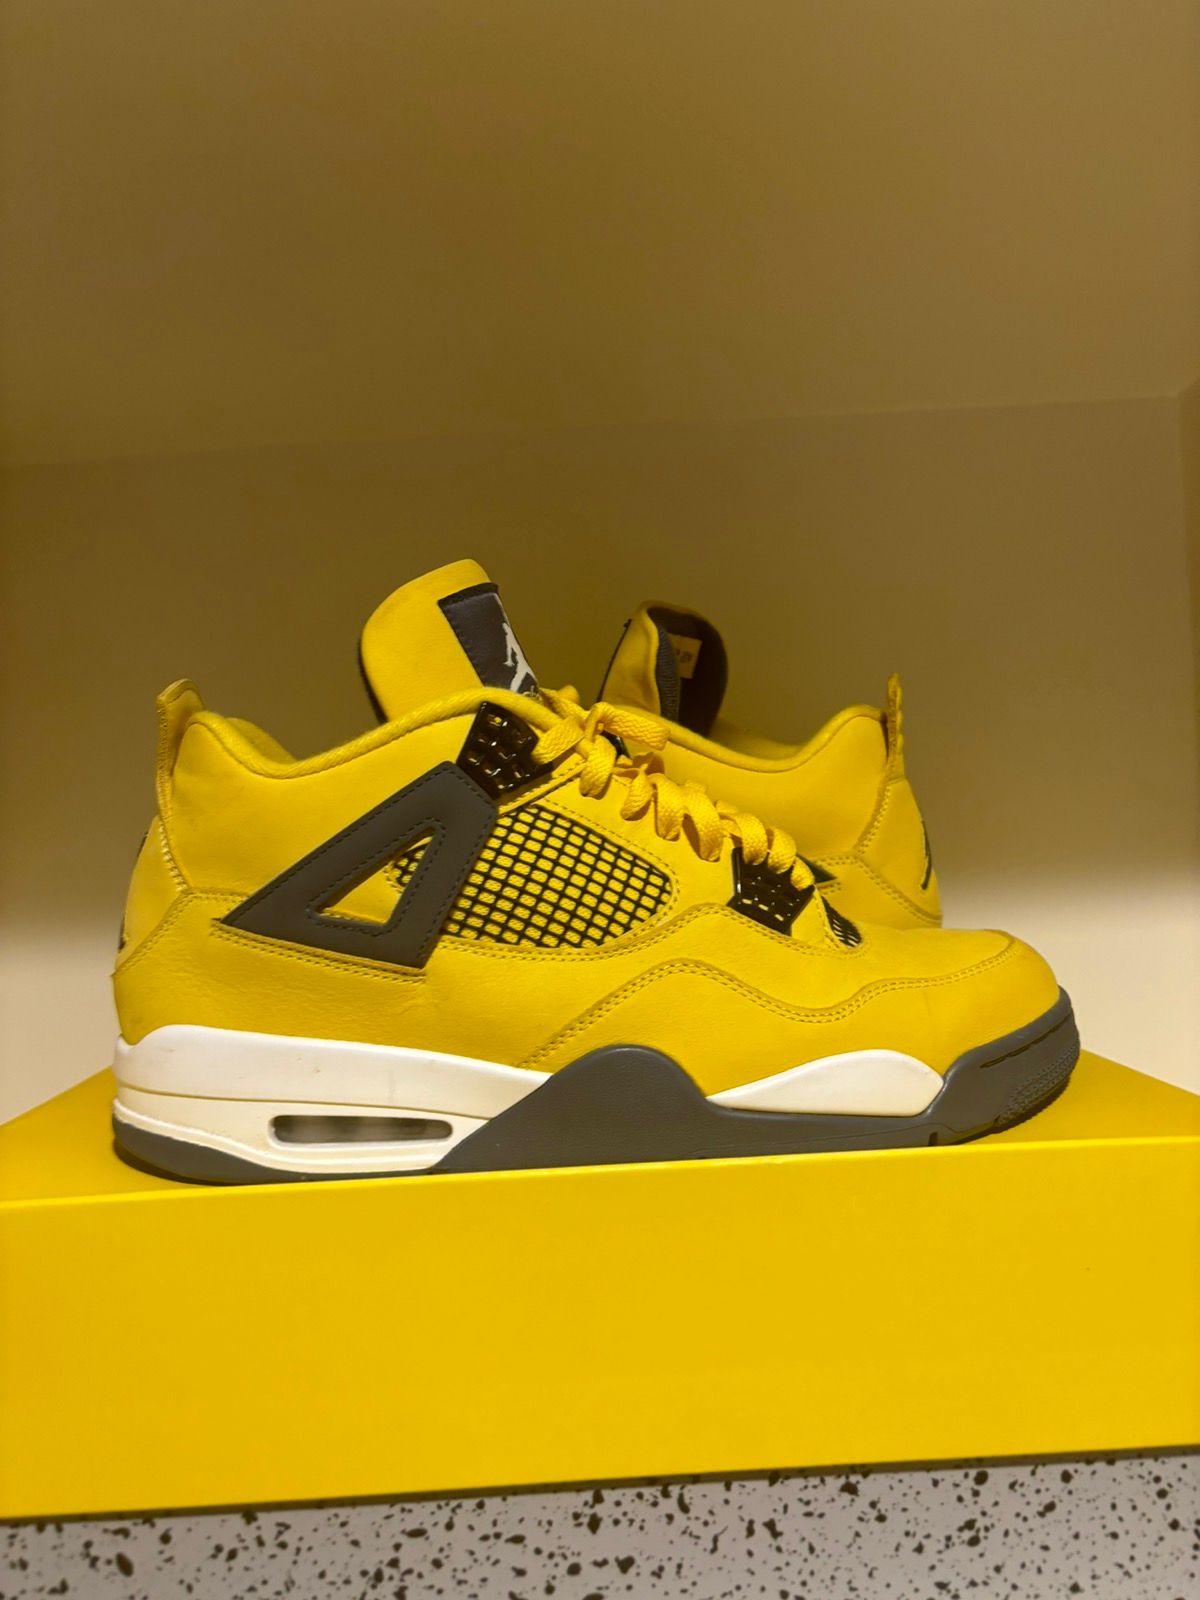 Pre-owned Jordan Brand 4 Lightning Size 12 Shoes In Yellow